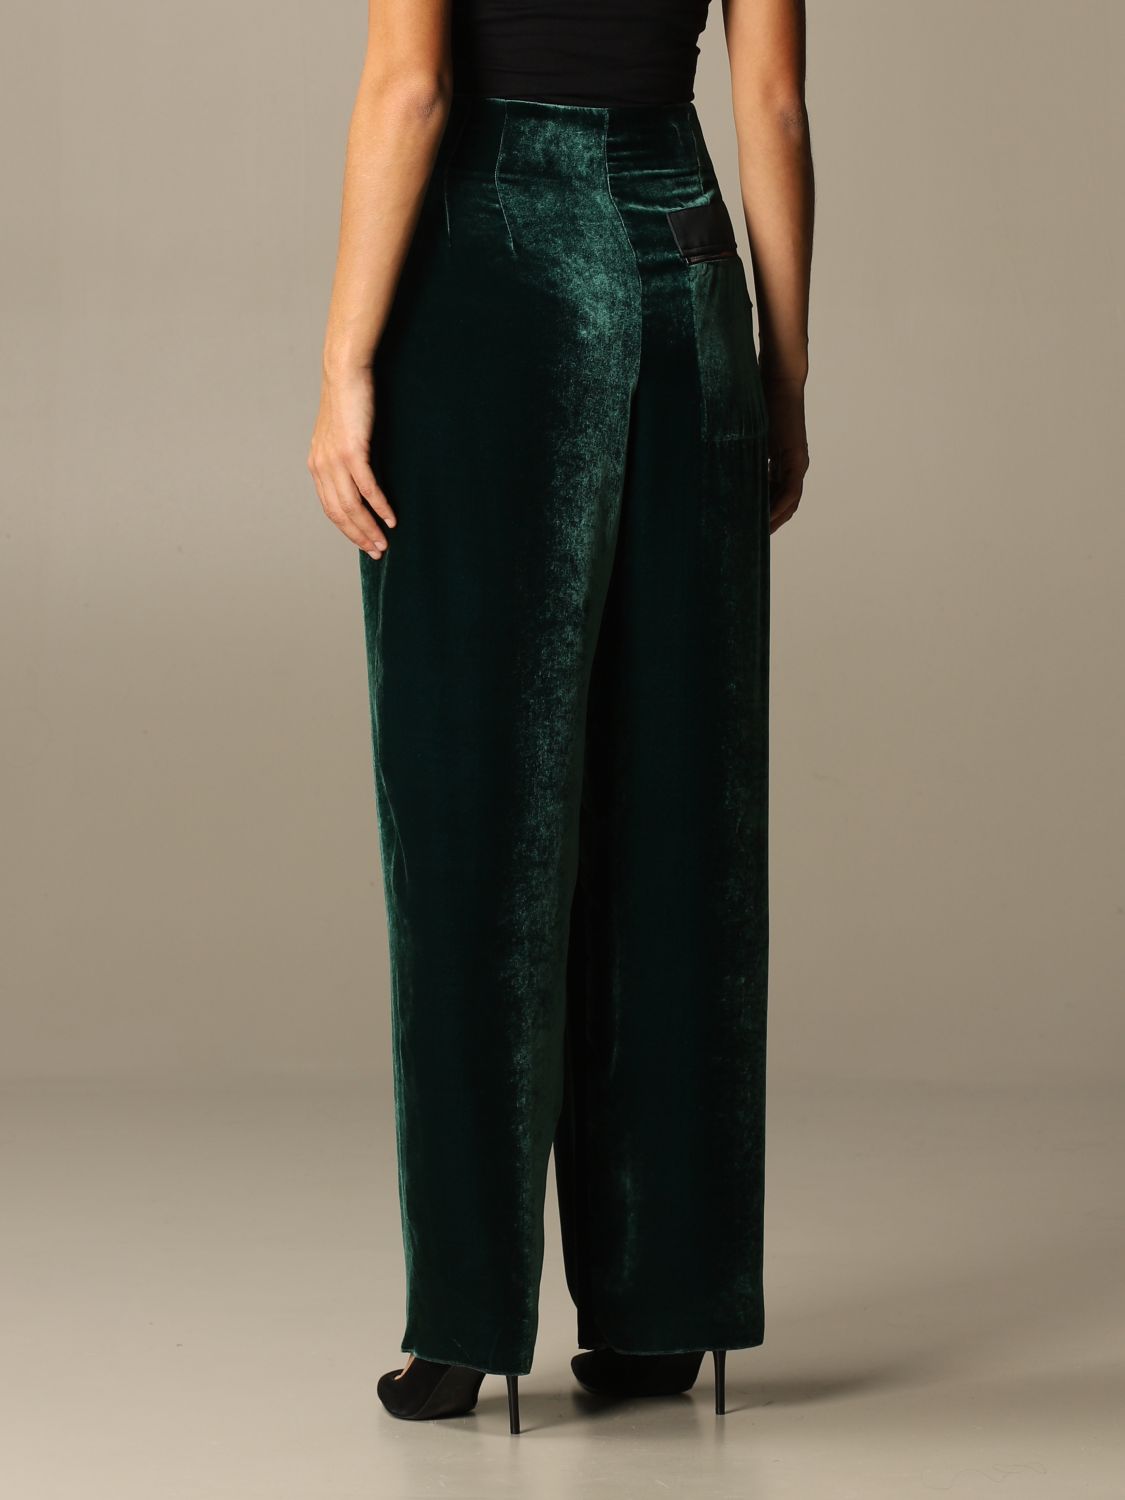 EMPORIO ARMANI: Wide trousers in velvet - Green | Emporio Armani pants  9NP23T 92822 online on 